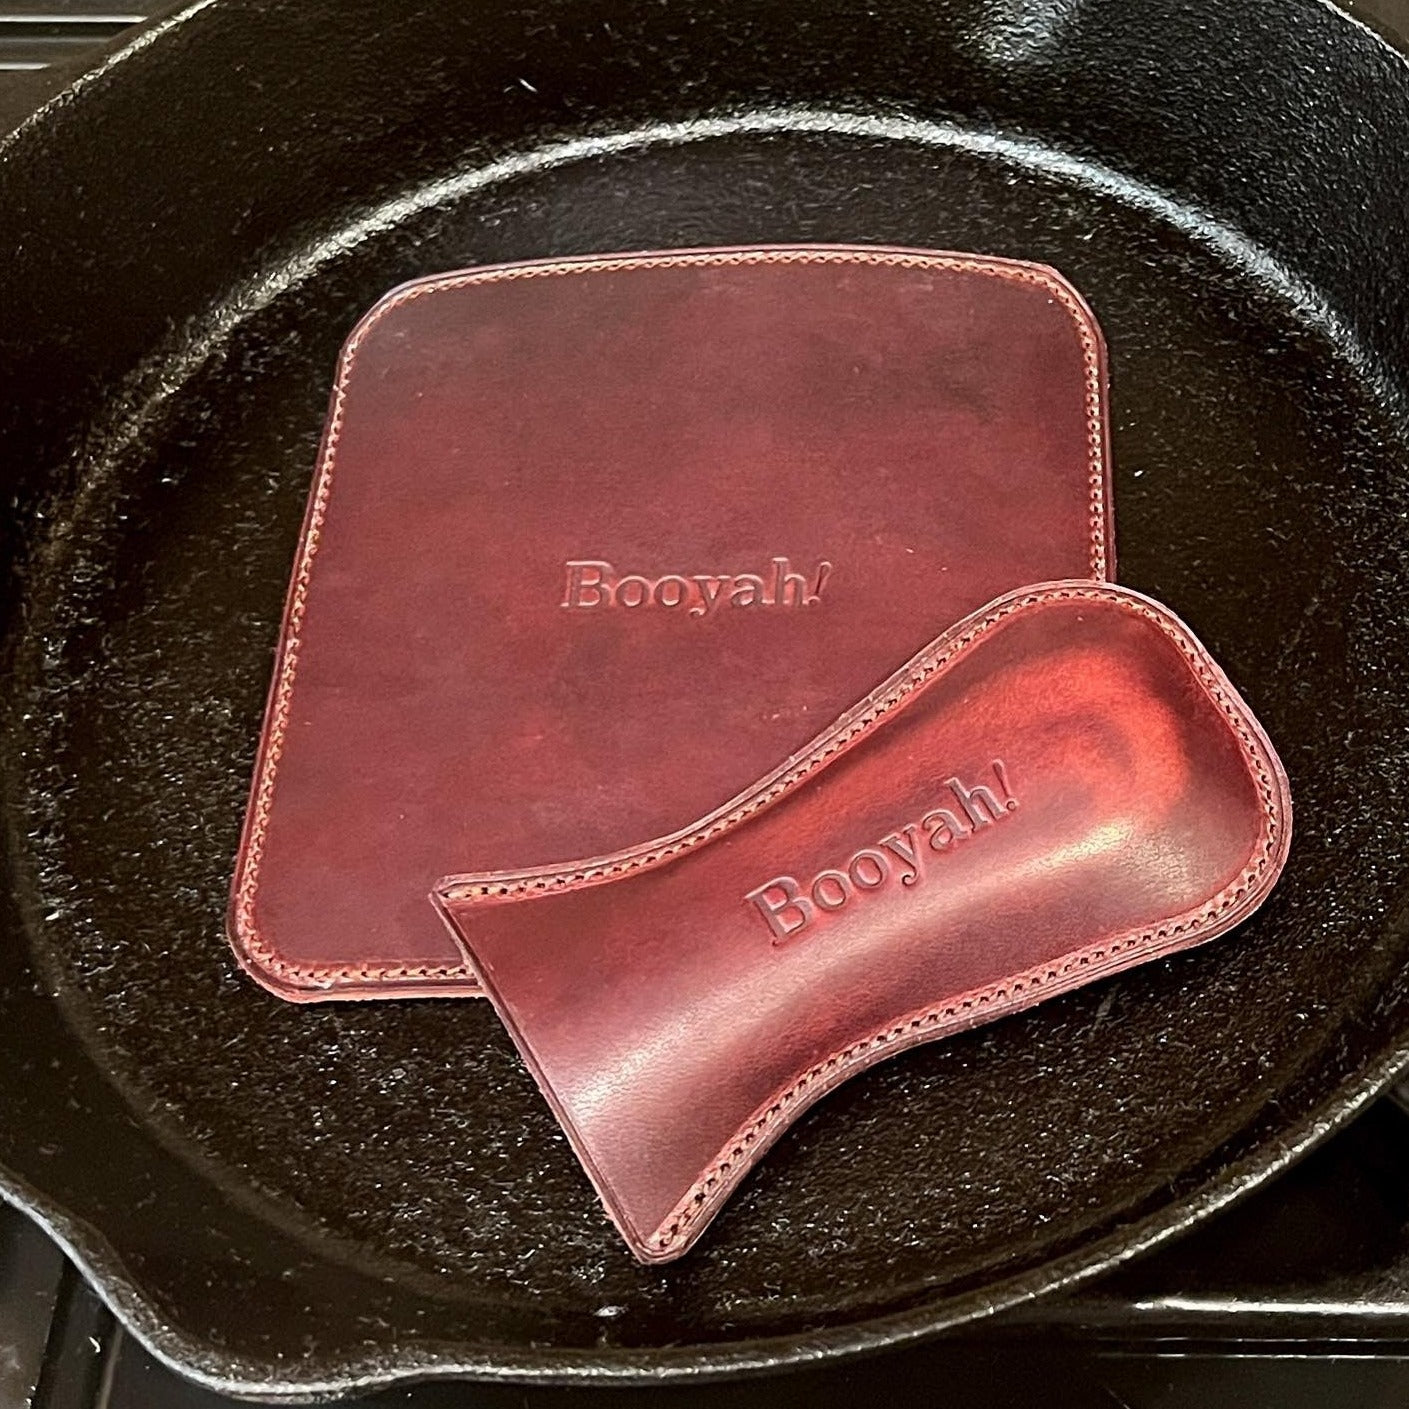 Handmade Cast Iron Skillet Trivet in Horween Leather | Handmade by Custom Leather and Pen